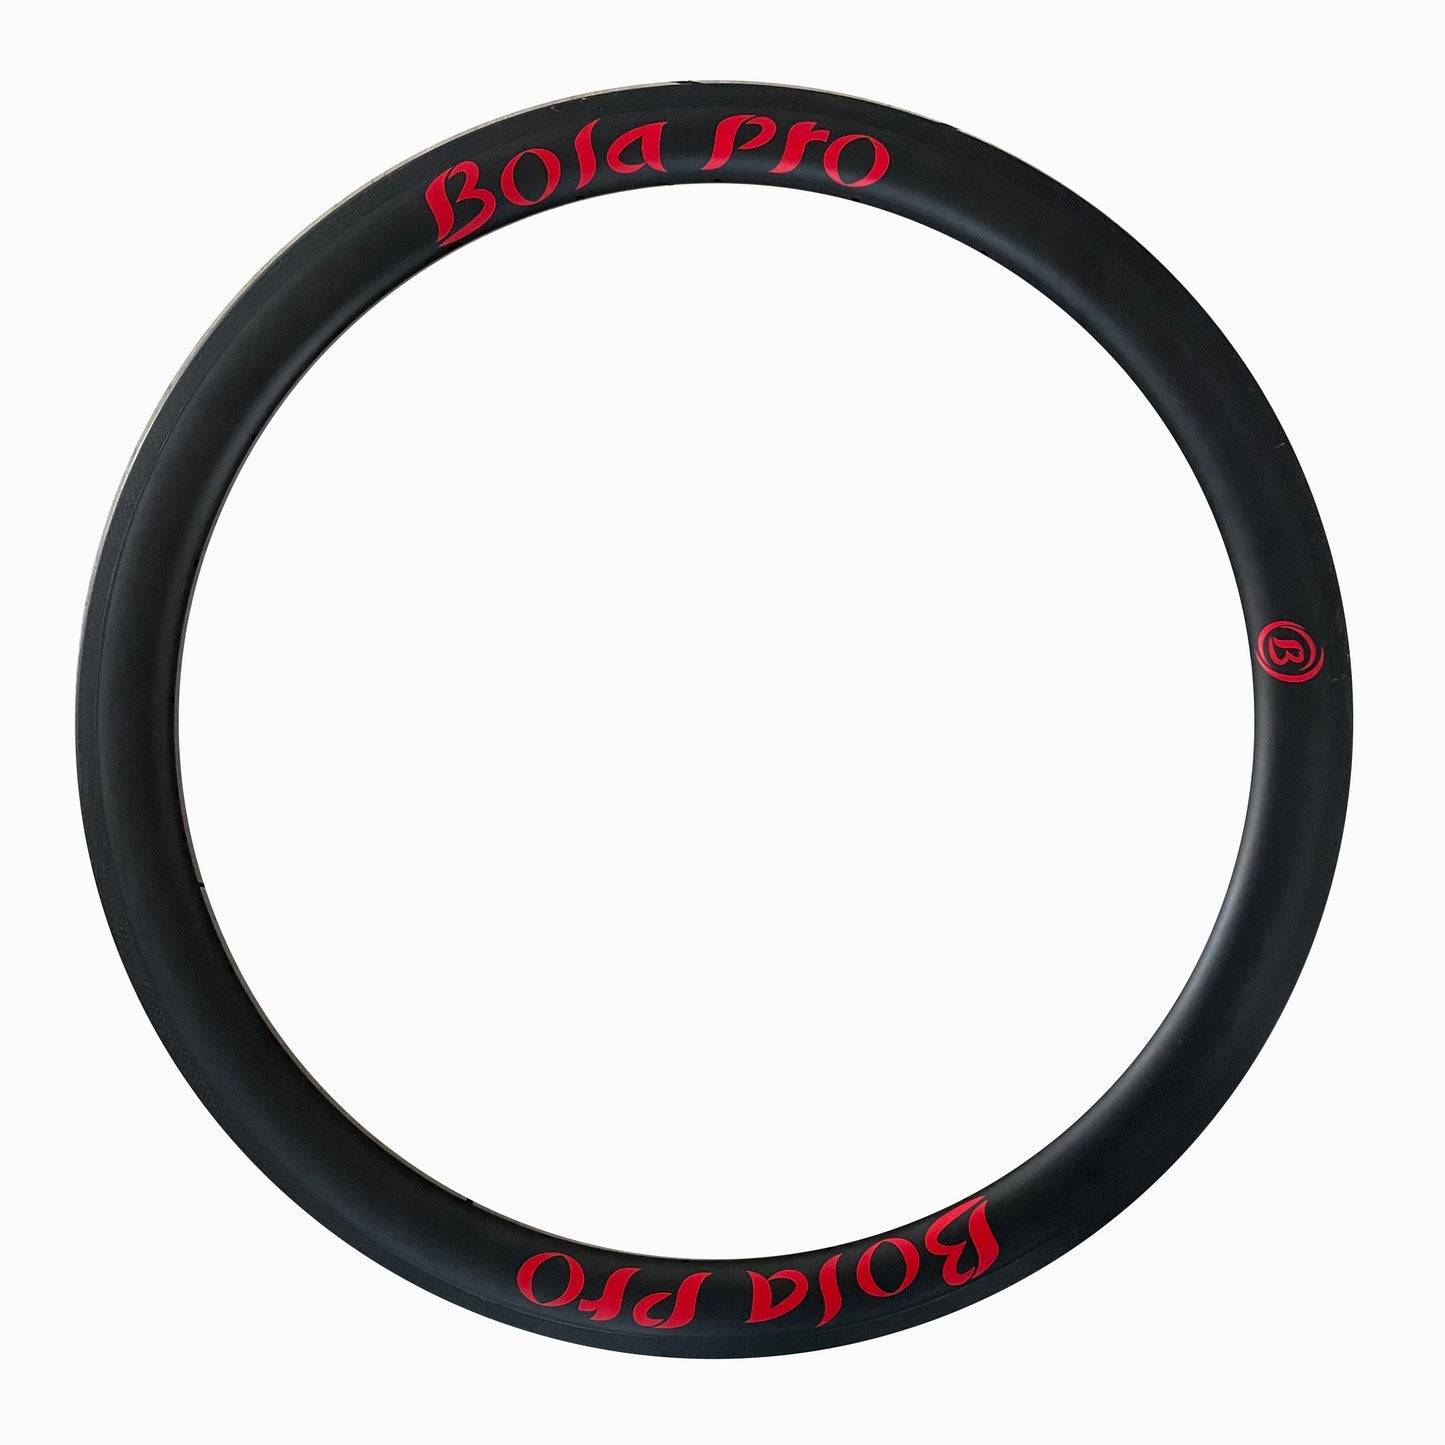 Tubular carbon velo rims 50mm height 28mm wide for cycling